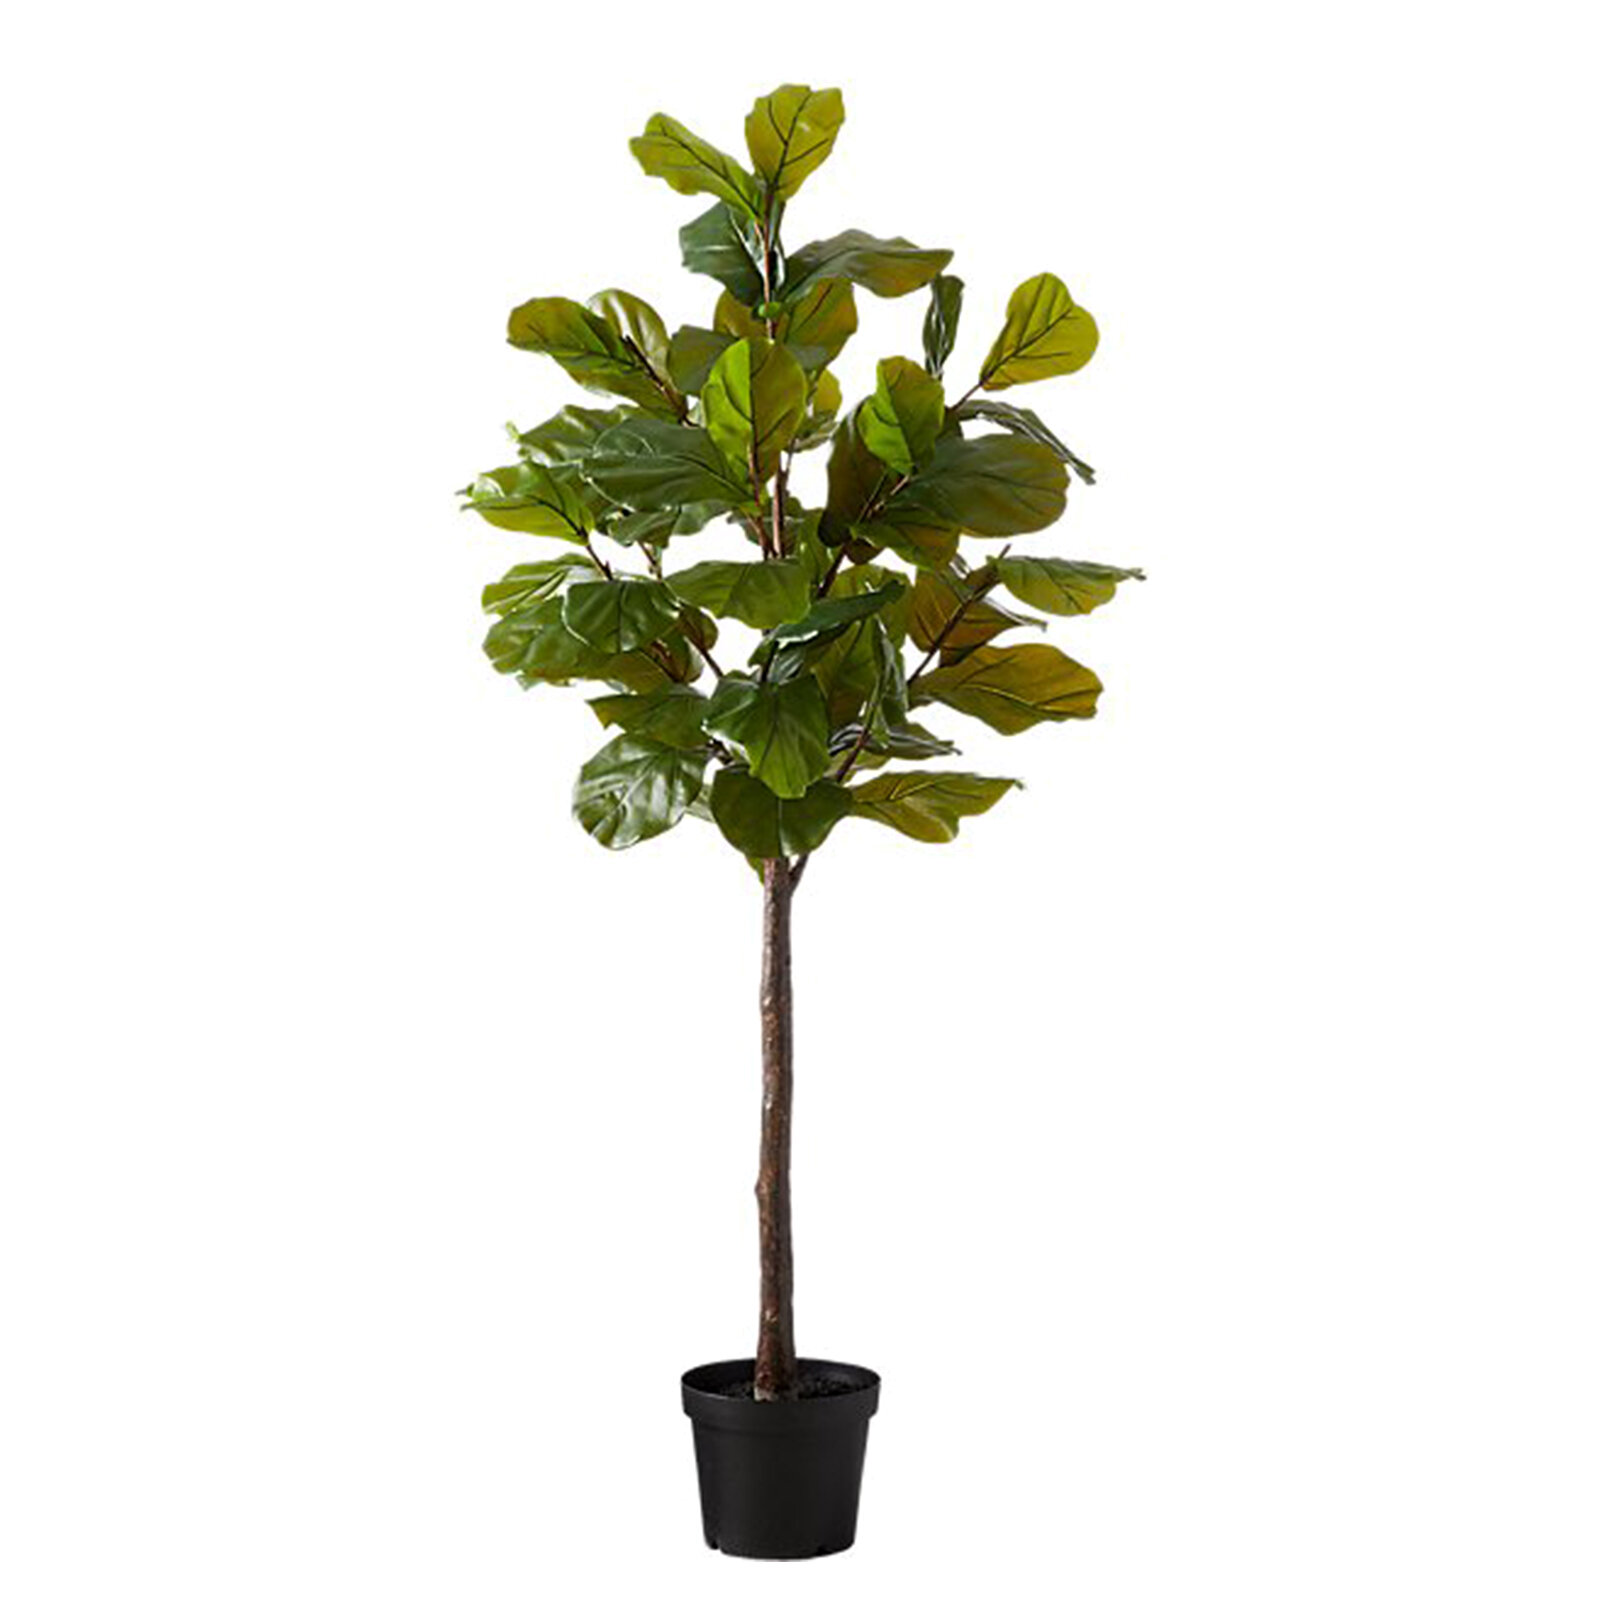 Faux Potted Fiddle Leaf Fig, Cb2, $399